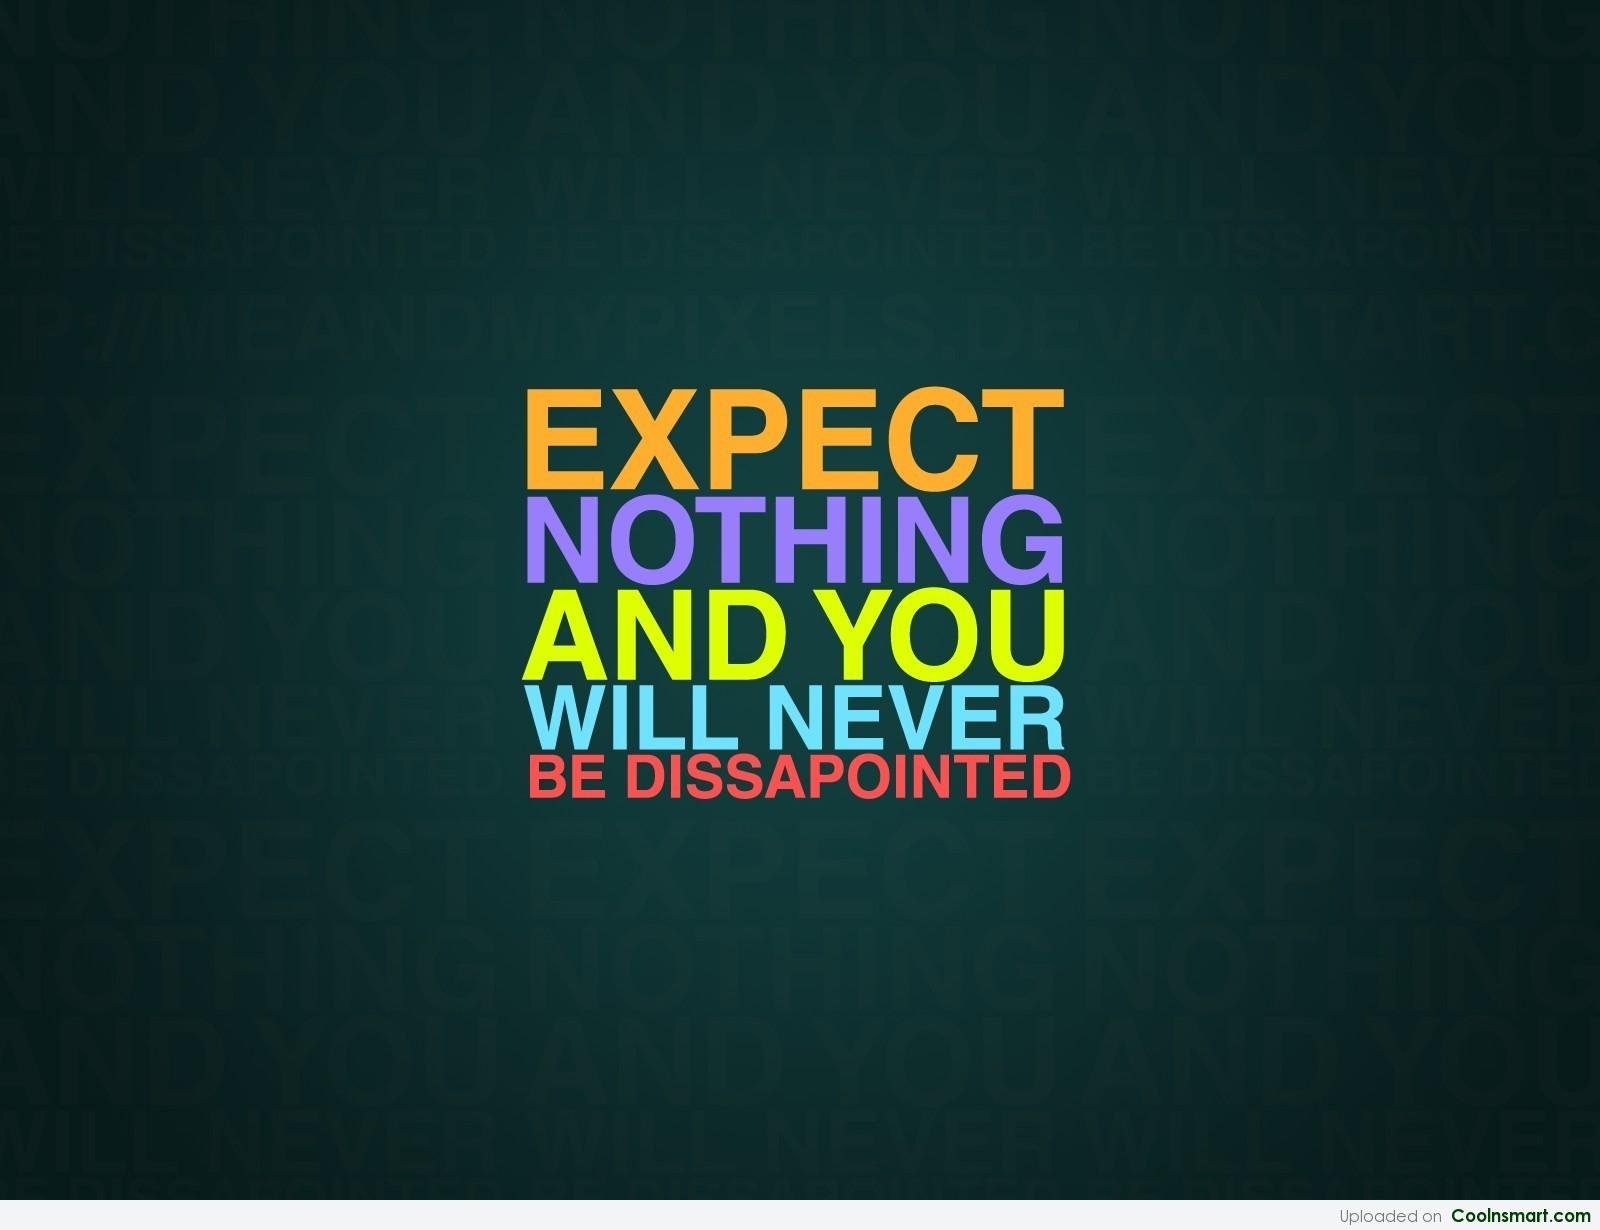 Expectations Lead To Disappointment Quotes. QuotesGram